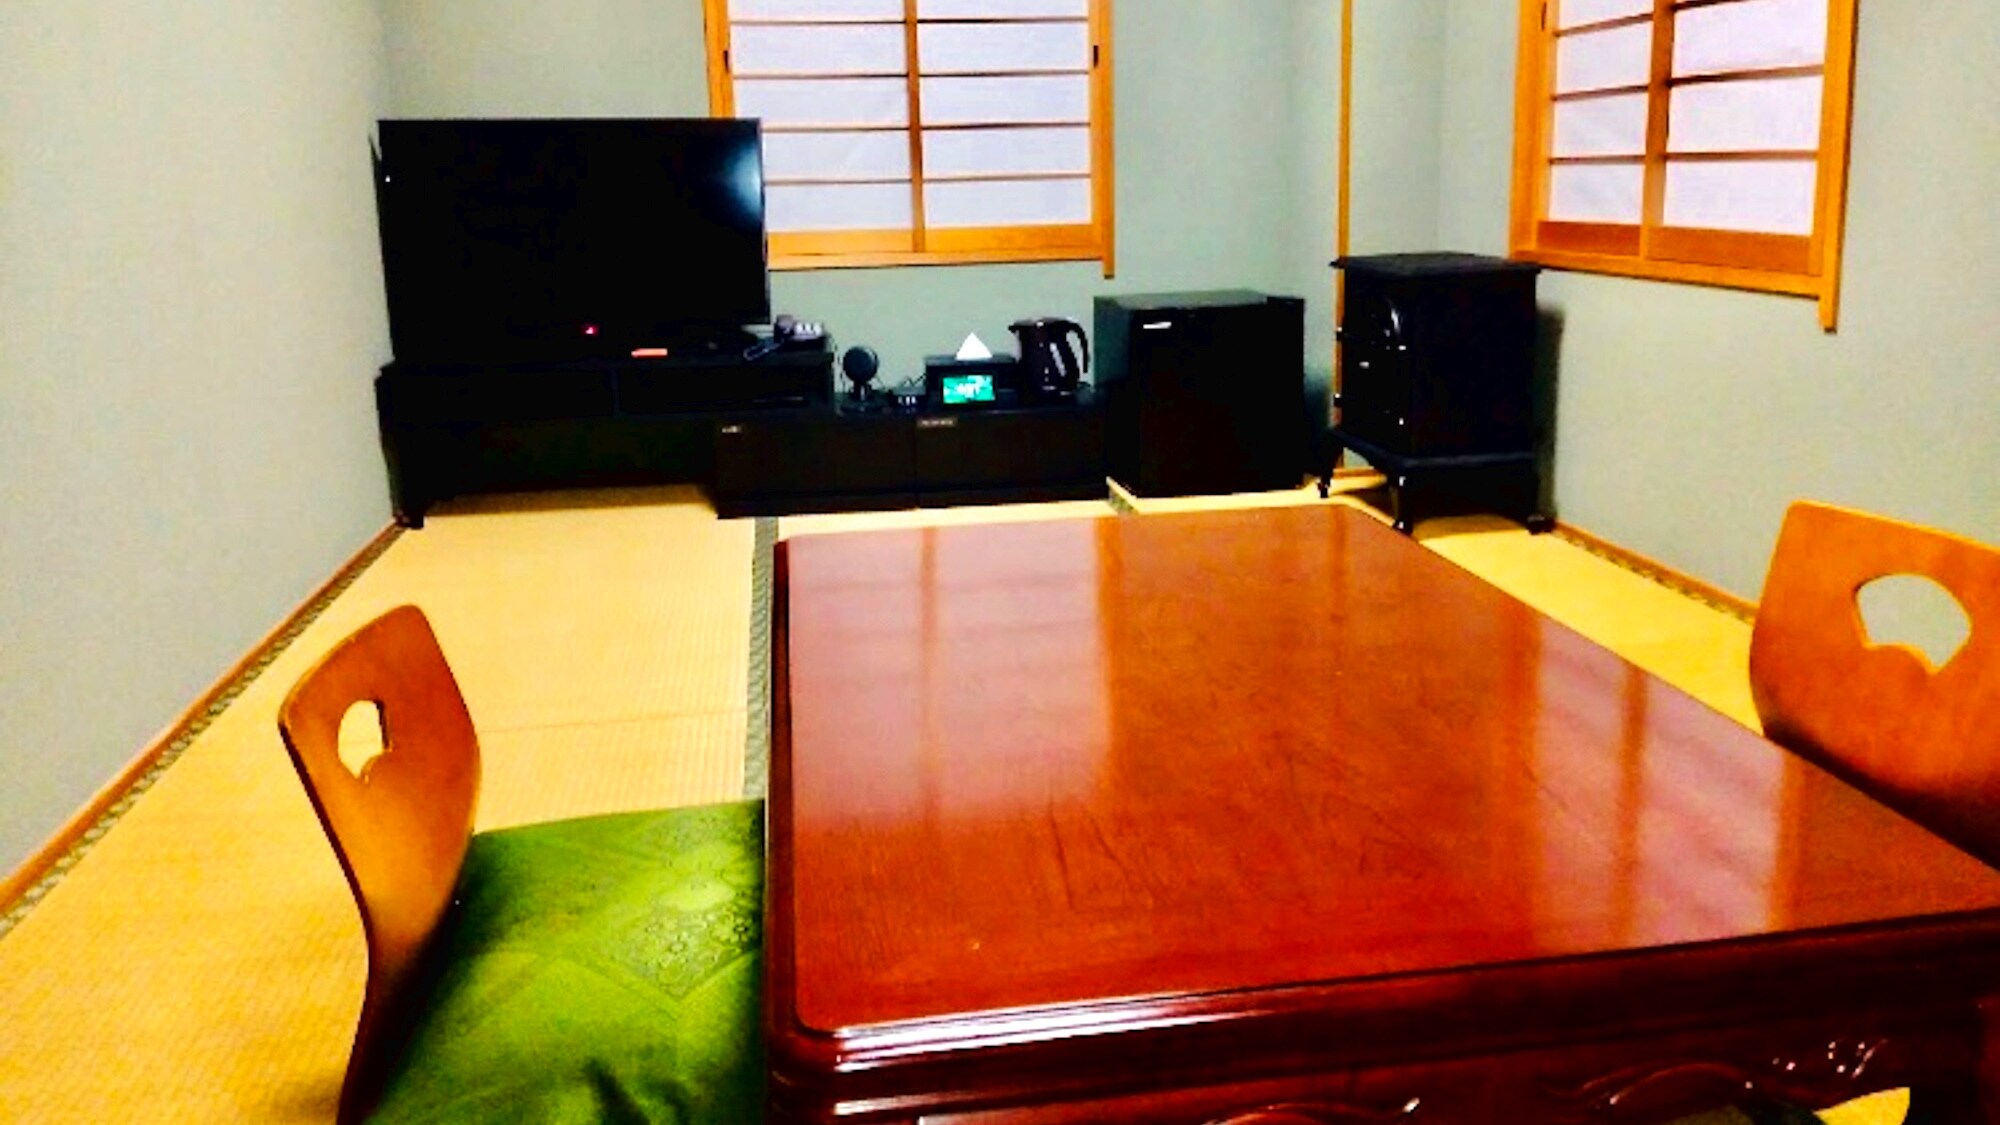 ・ An example of a Japanese-style room with 6 tatami mats